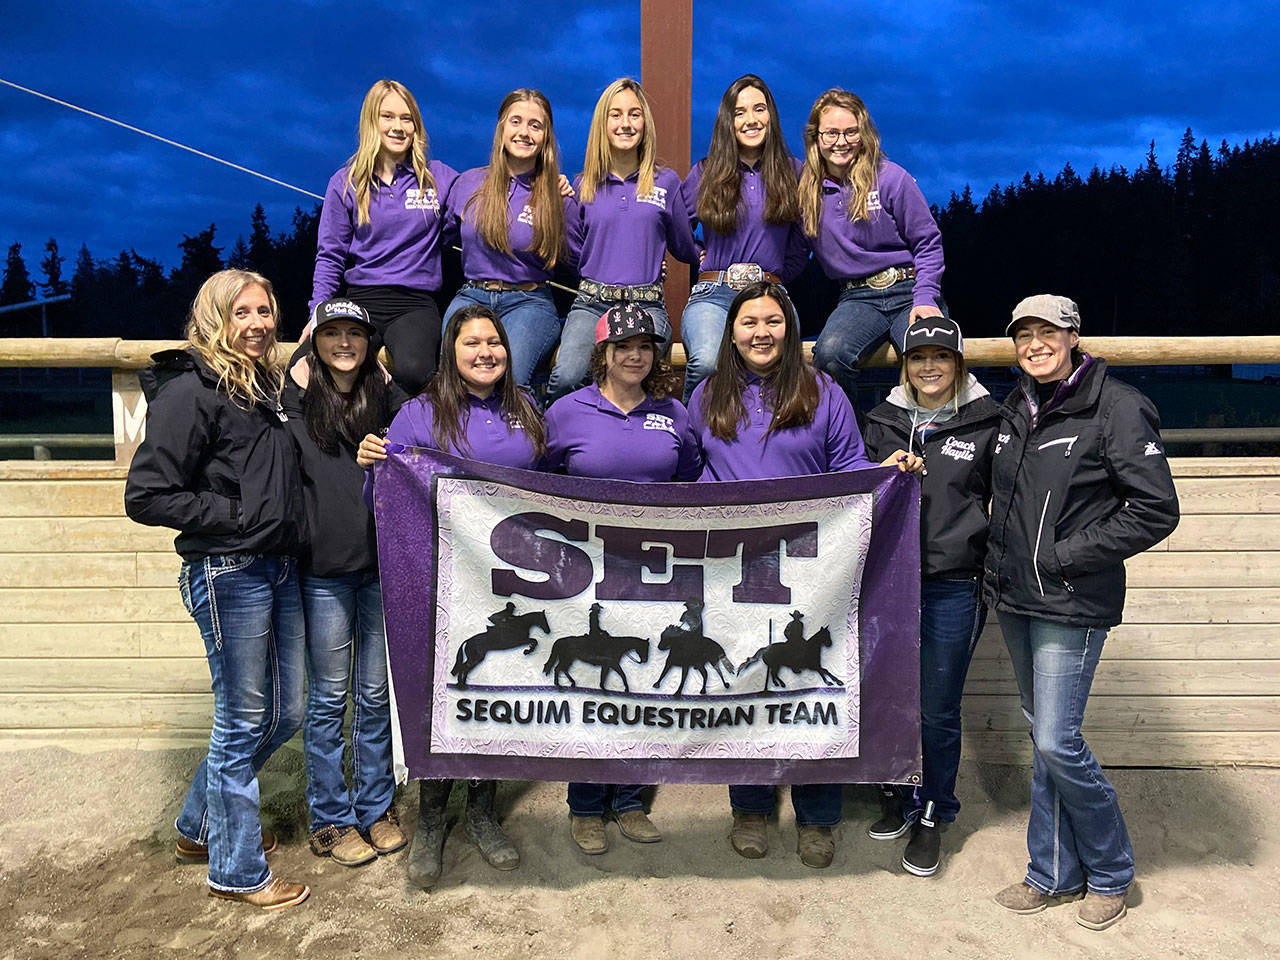 The Sequim Equestrian Team is all smiles at the first district meet of the 2020 season in Elma this past weekend. Pictured are (back row, from left) Lexi King, Hannah Kokoschko, Grace Niemeyer, Emma Albright and Keri Tucker, with (front row, from left) coach Bettina Hoesel, coach Sydney Balkan, Abby Garcia, Abbi Priest, Lilly Thomas, coach Haylie Newton and coach Katie Newton. Submitted photo